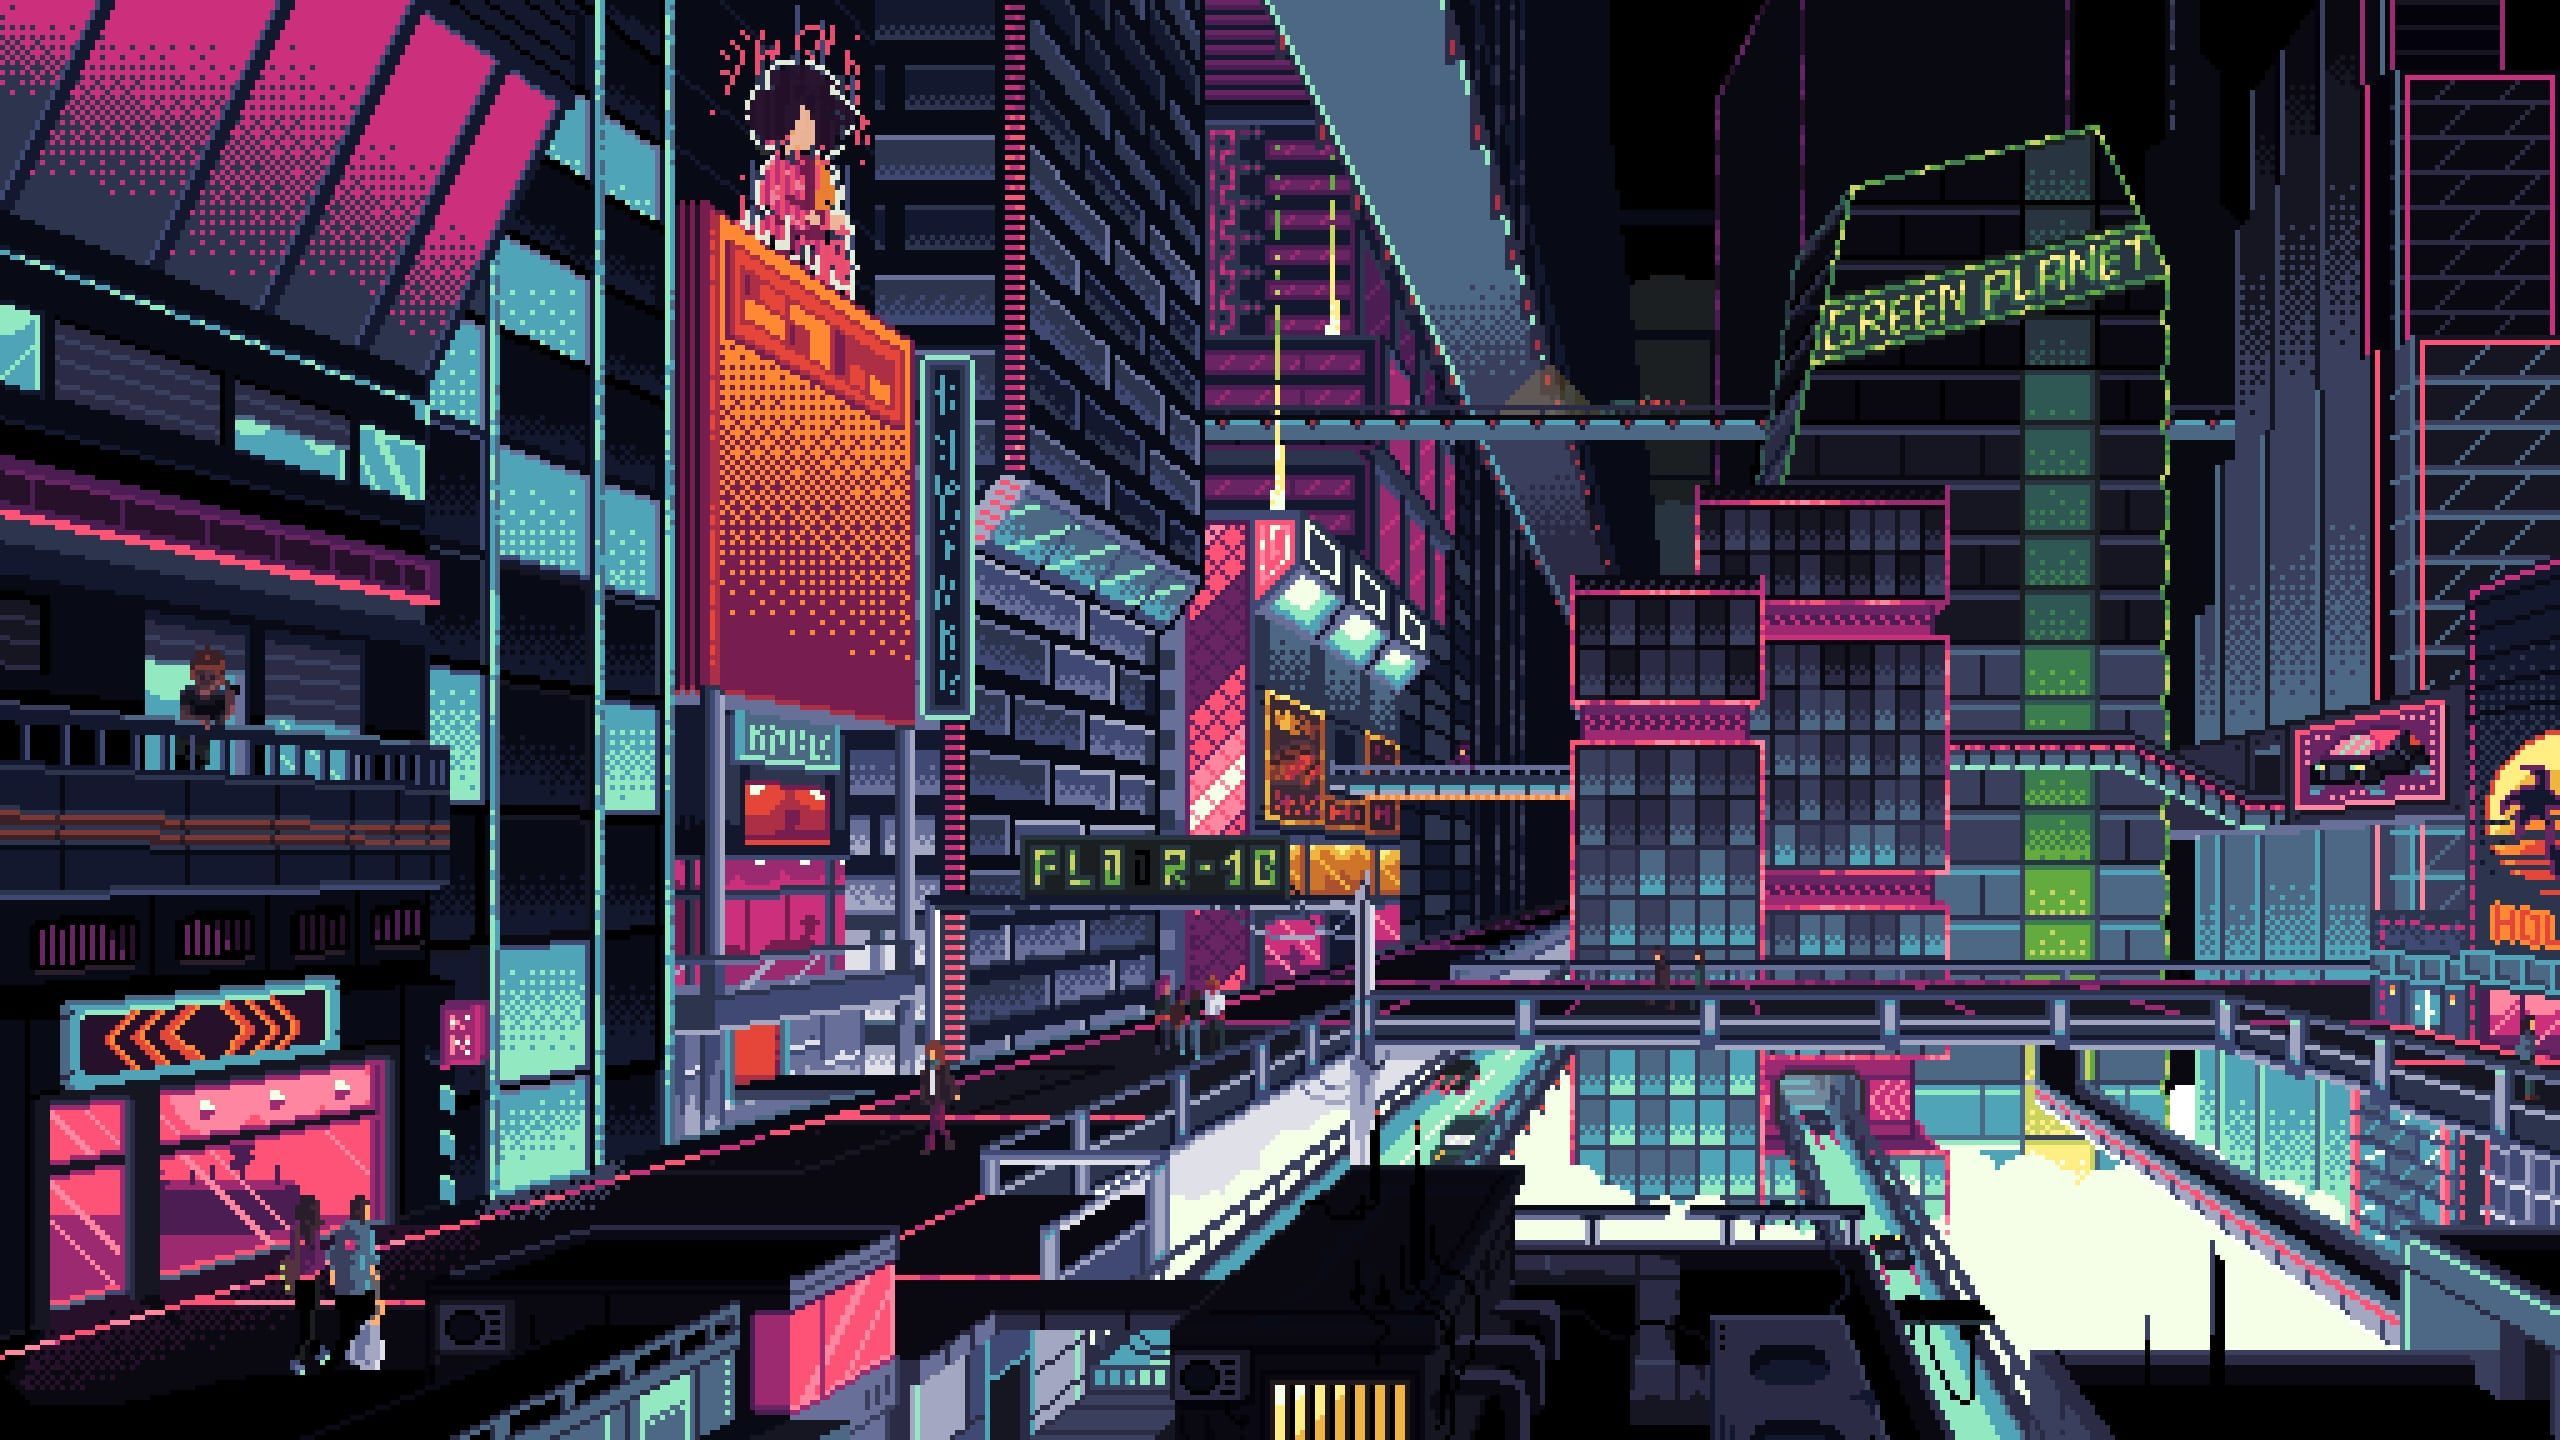 A cyberpunk city at night, with skyscrapers and neon lights. - Gaming, pixel art